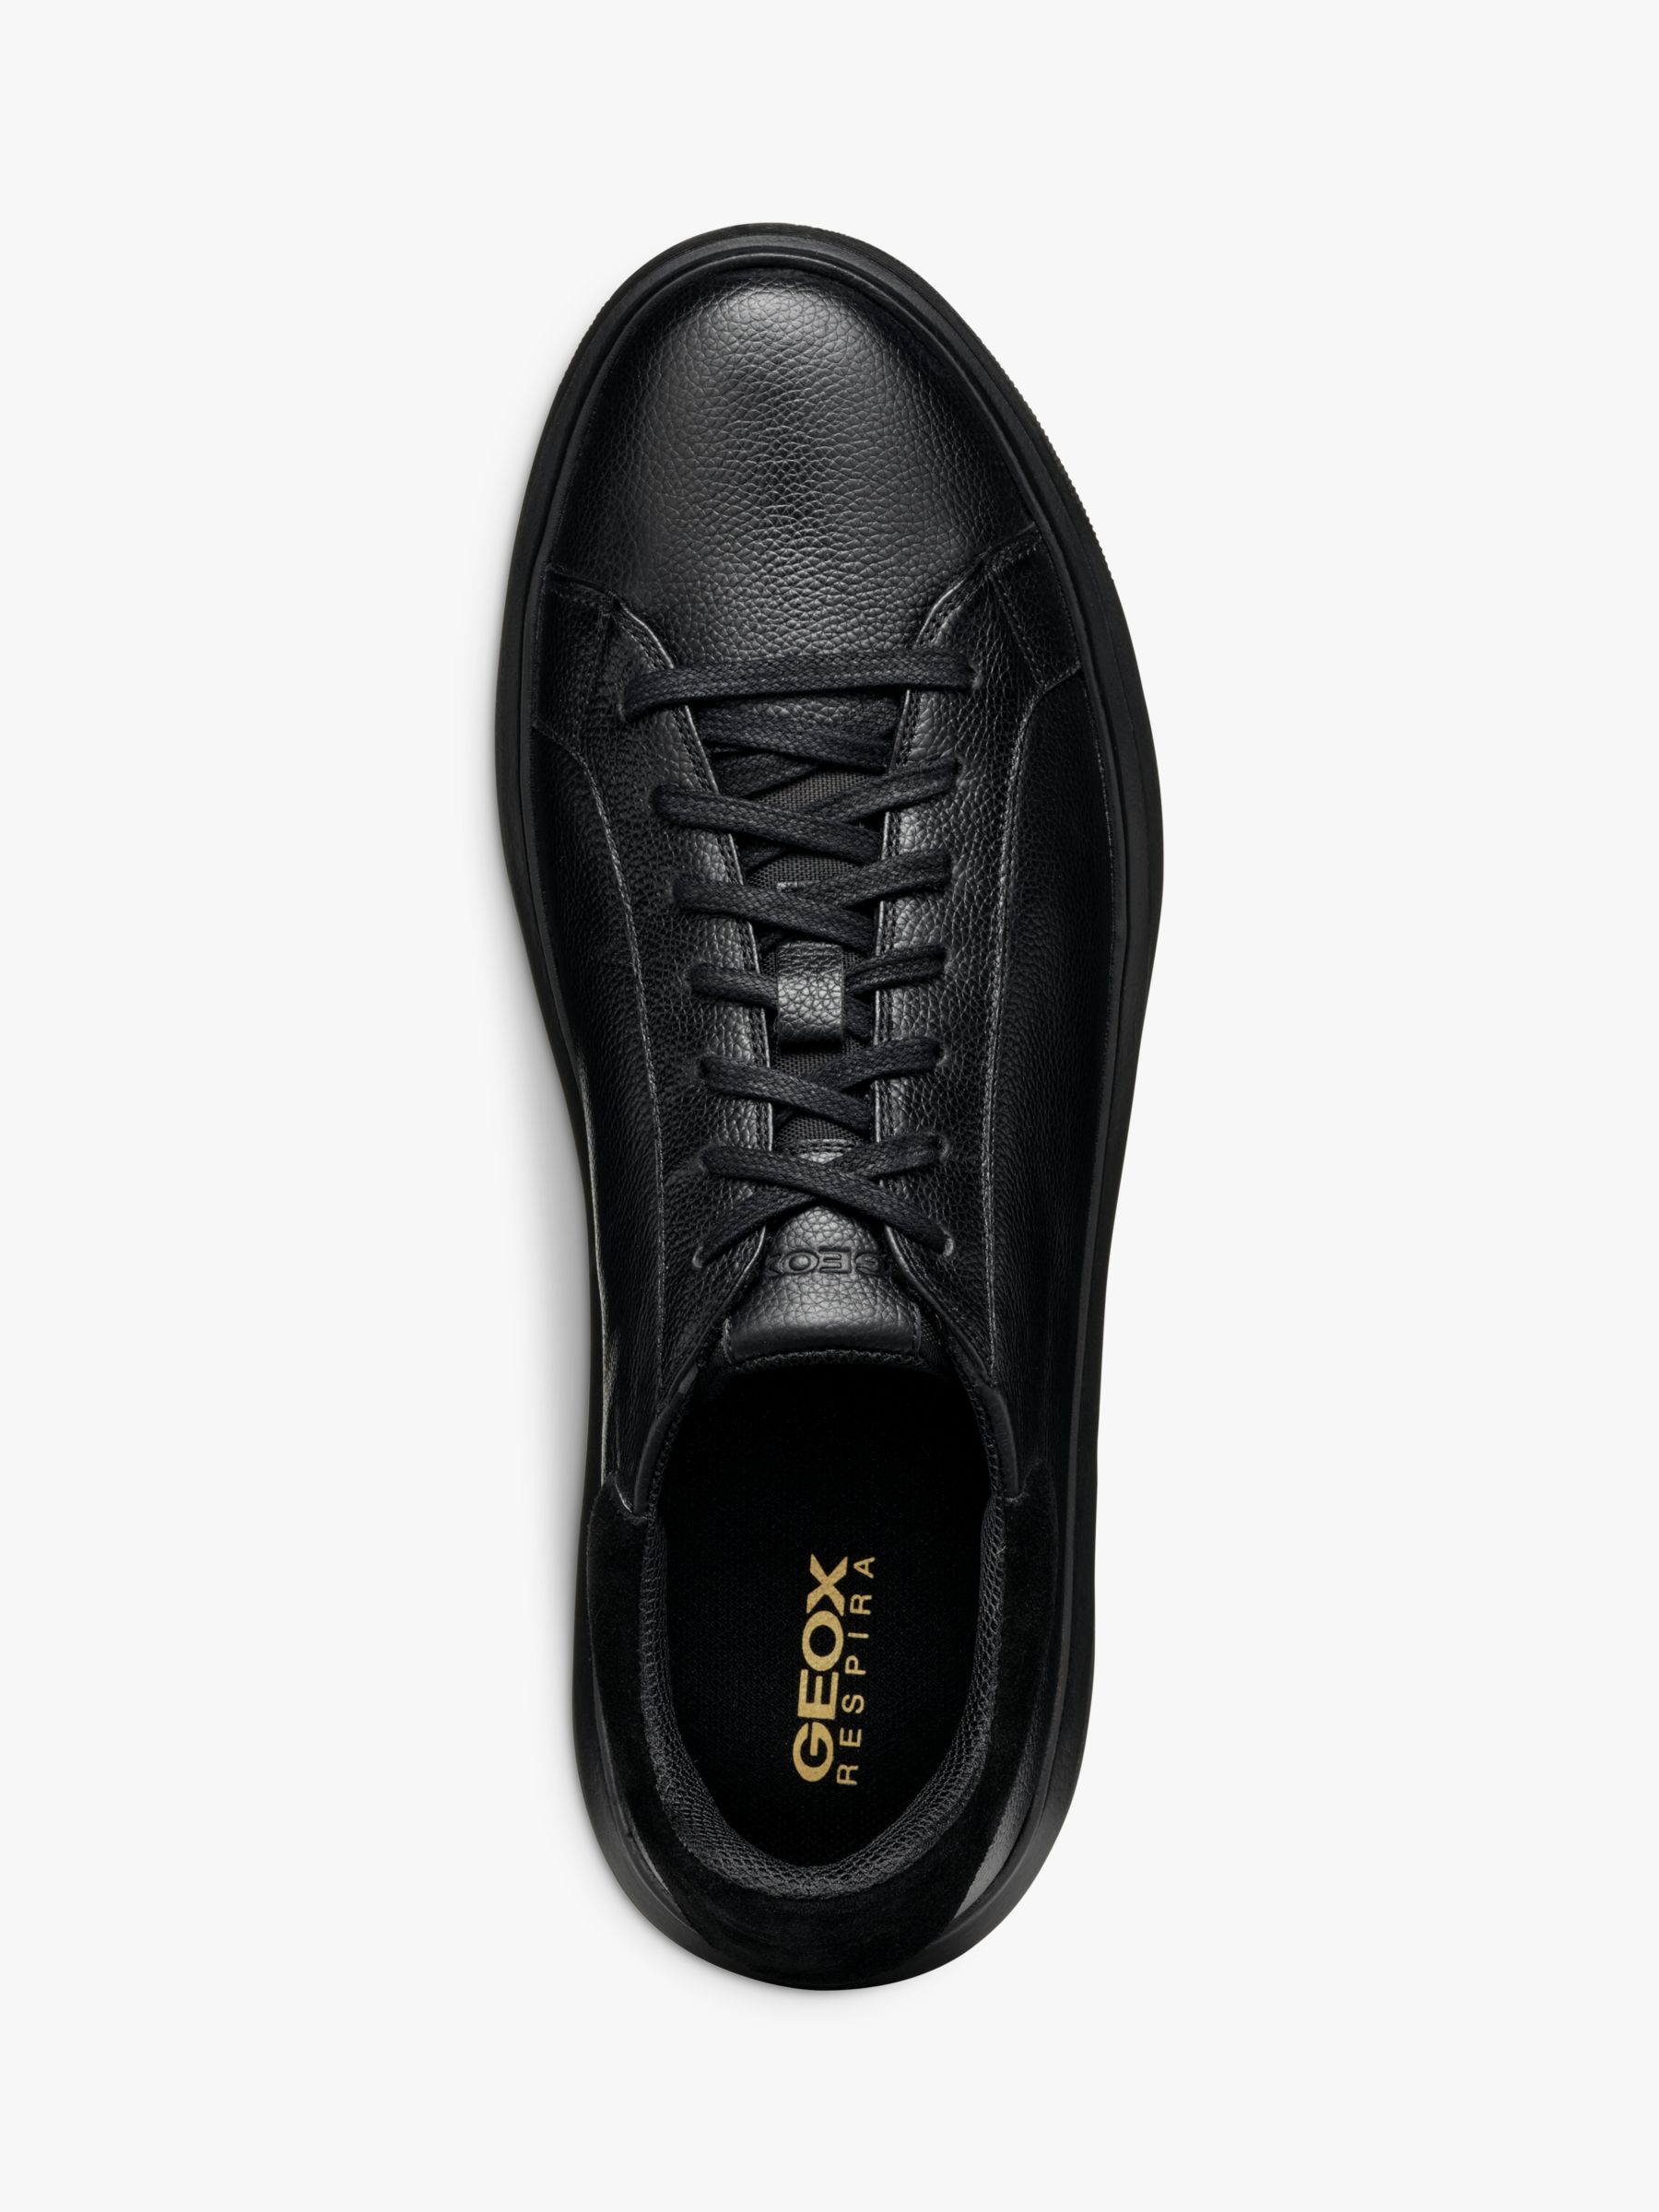 Buy Geox Deiven Low-Cut Trainers, Black Online at johnlewis.com